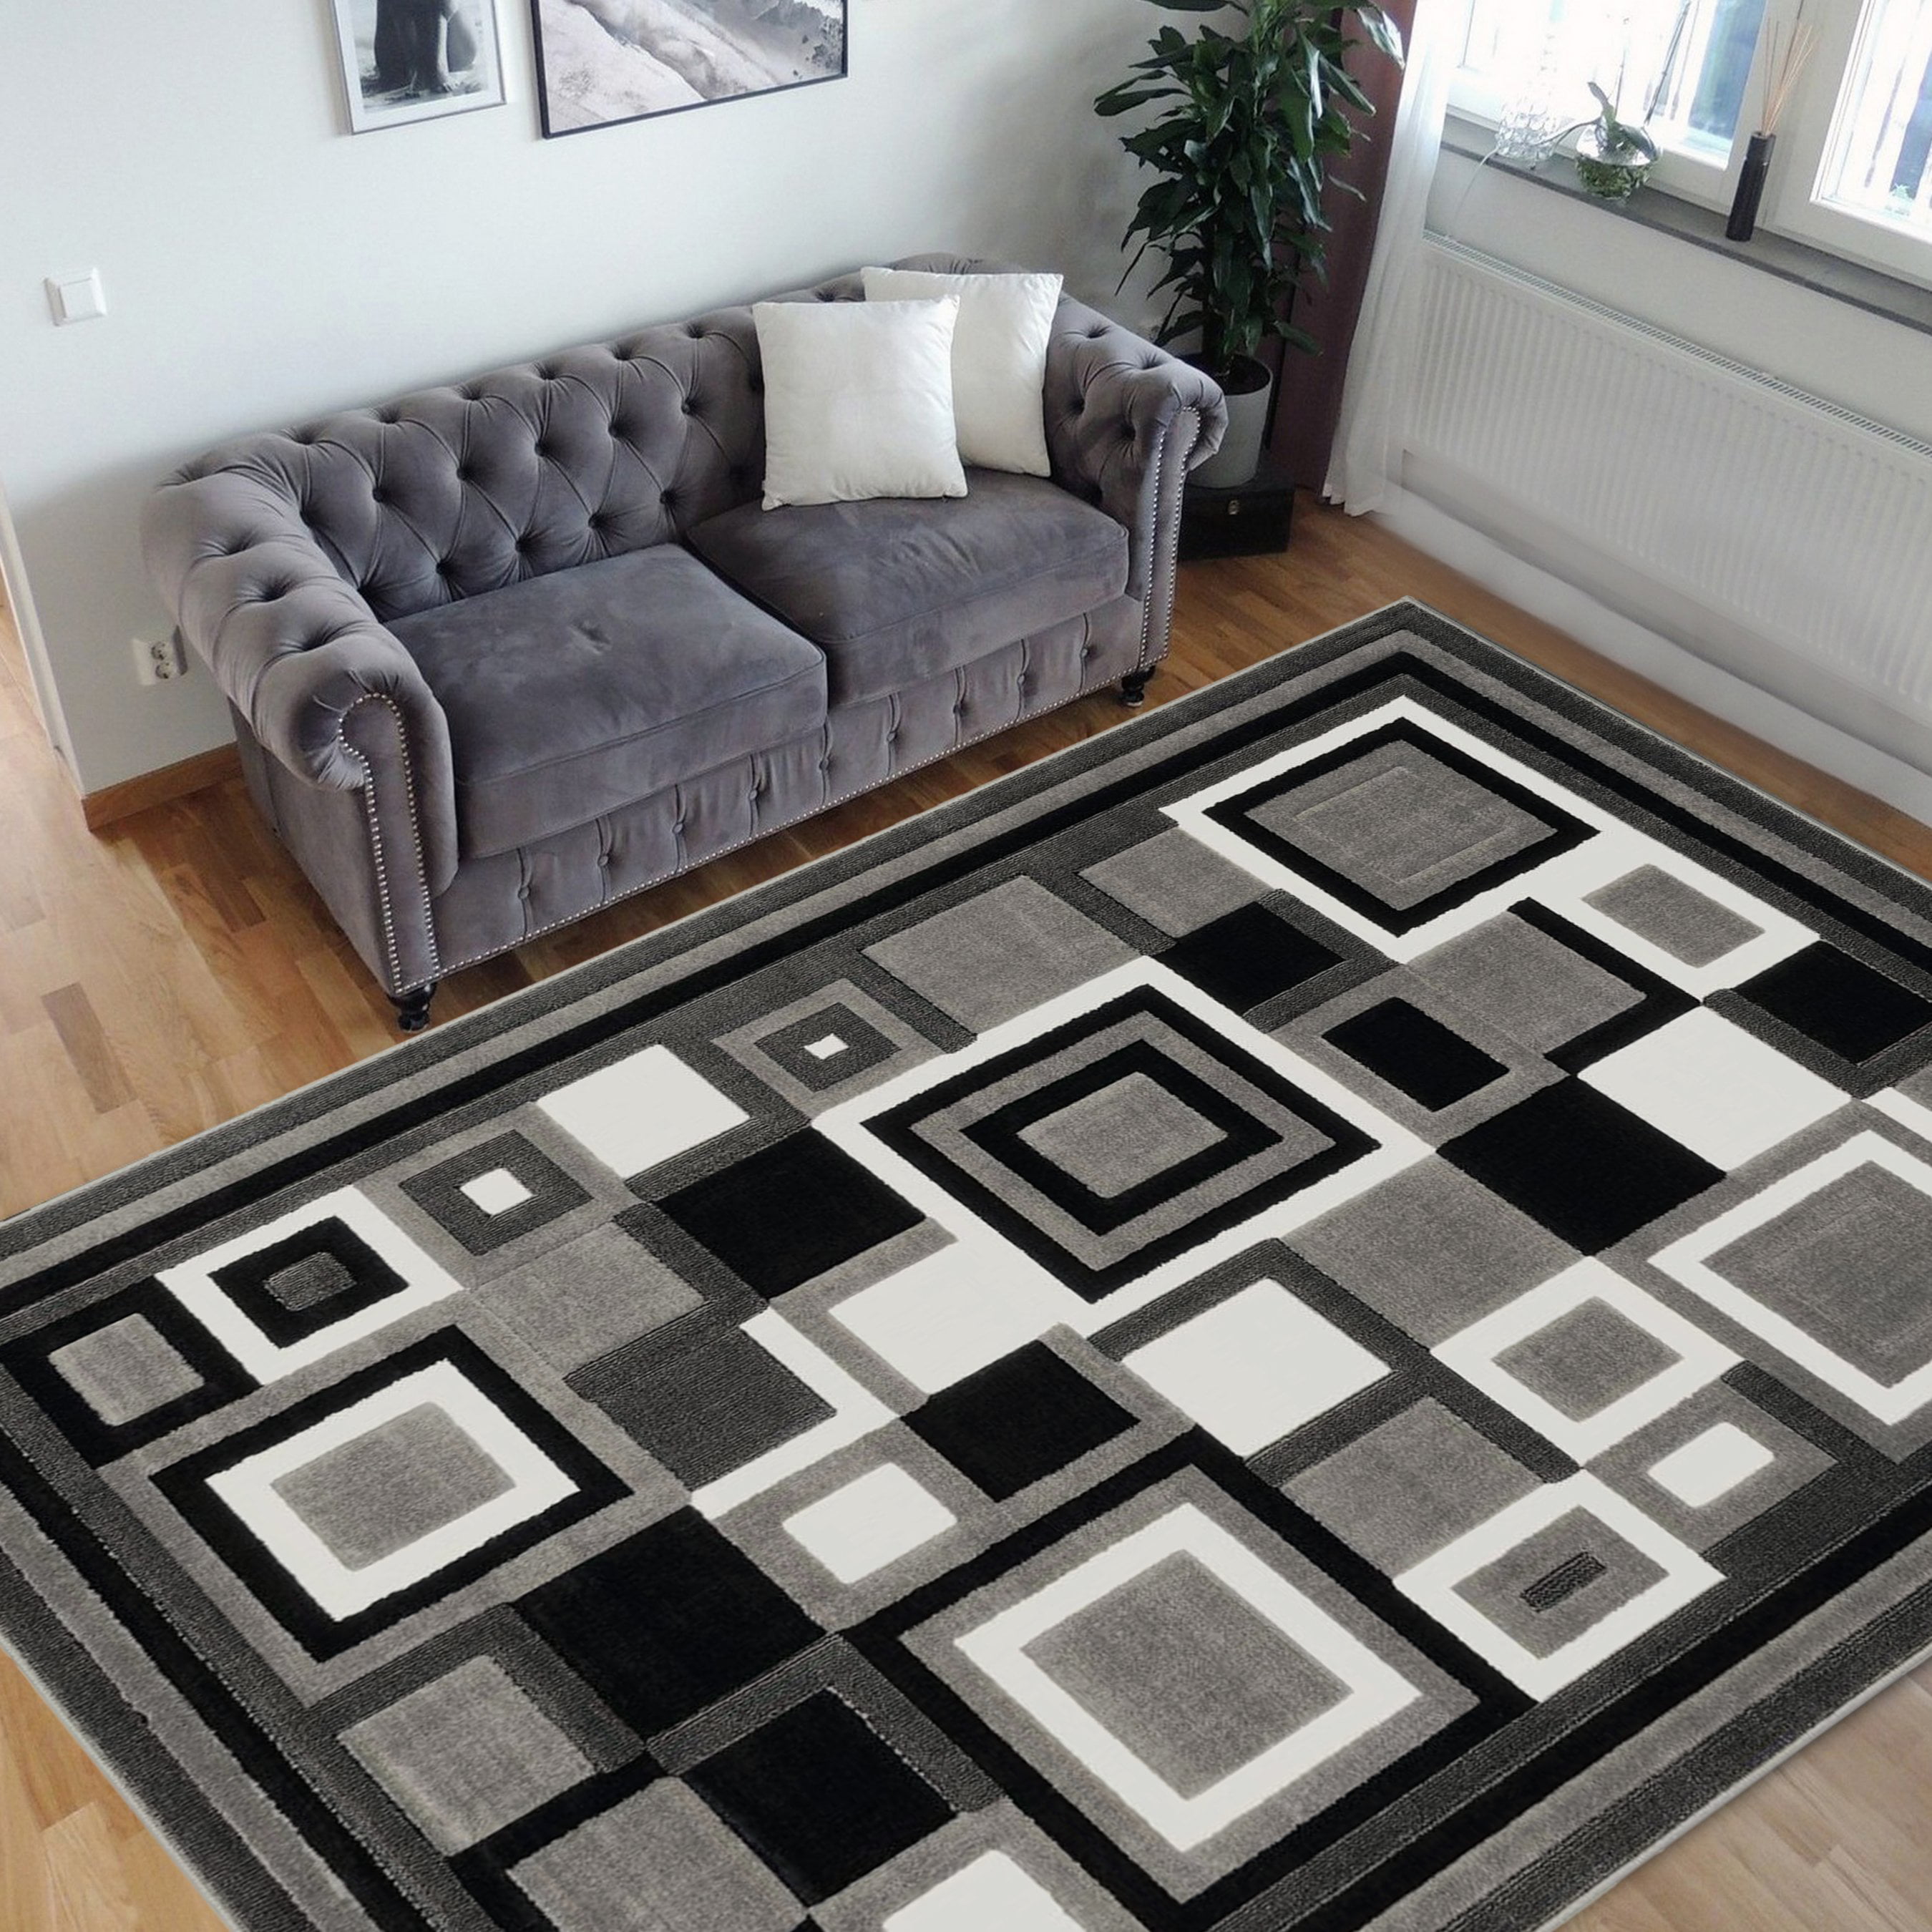 Large Area Cheap Living Room Rugs Modern Floral Clearance Geometric Sale Runner 